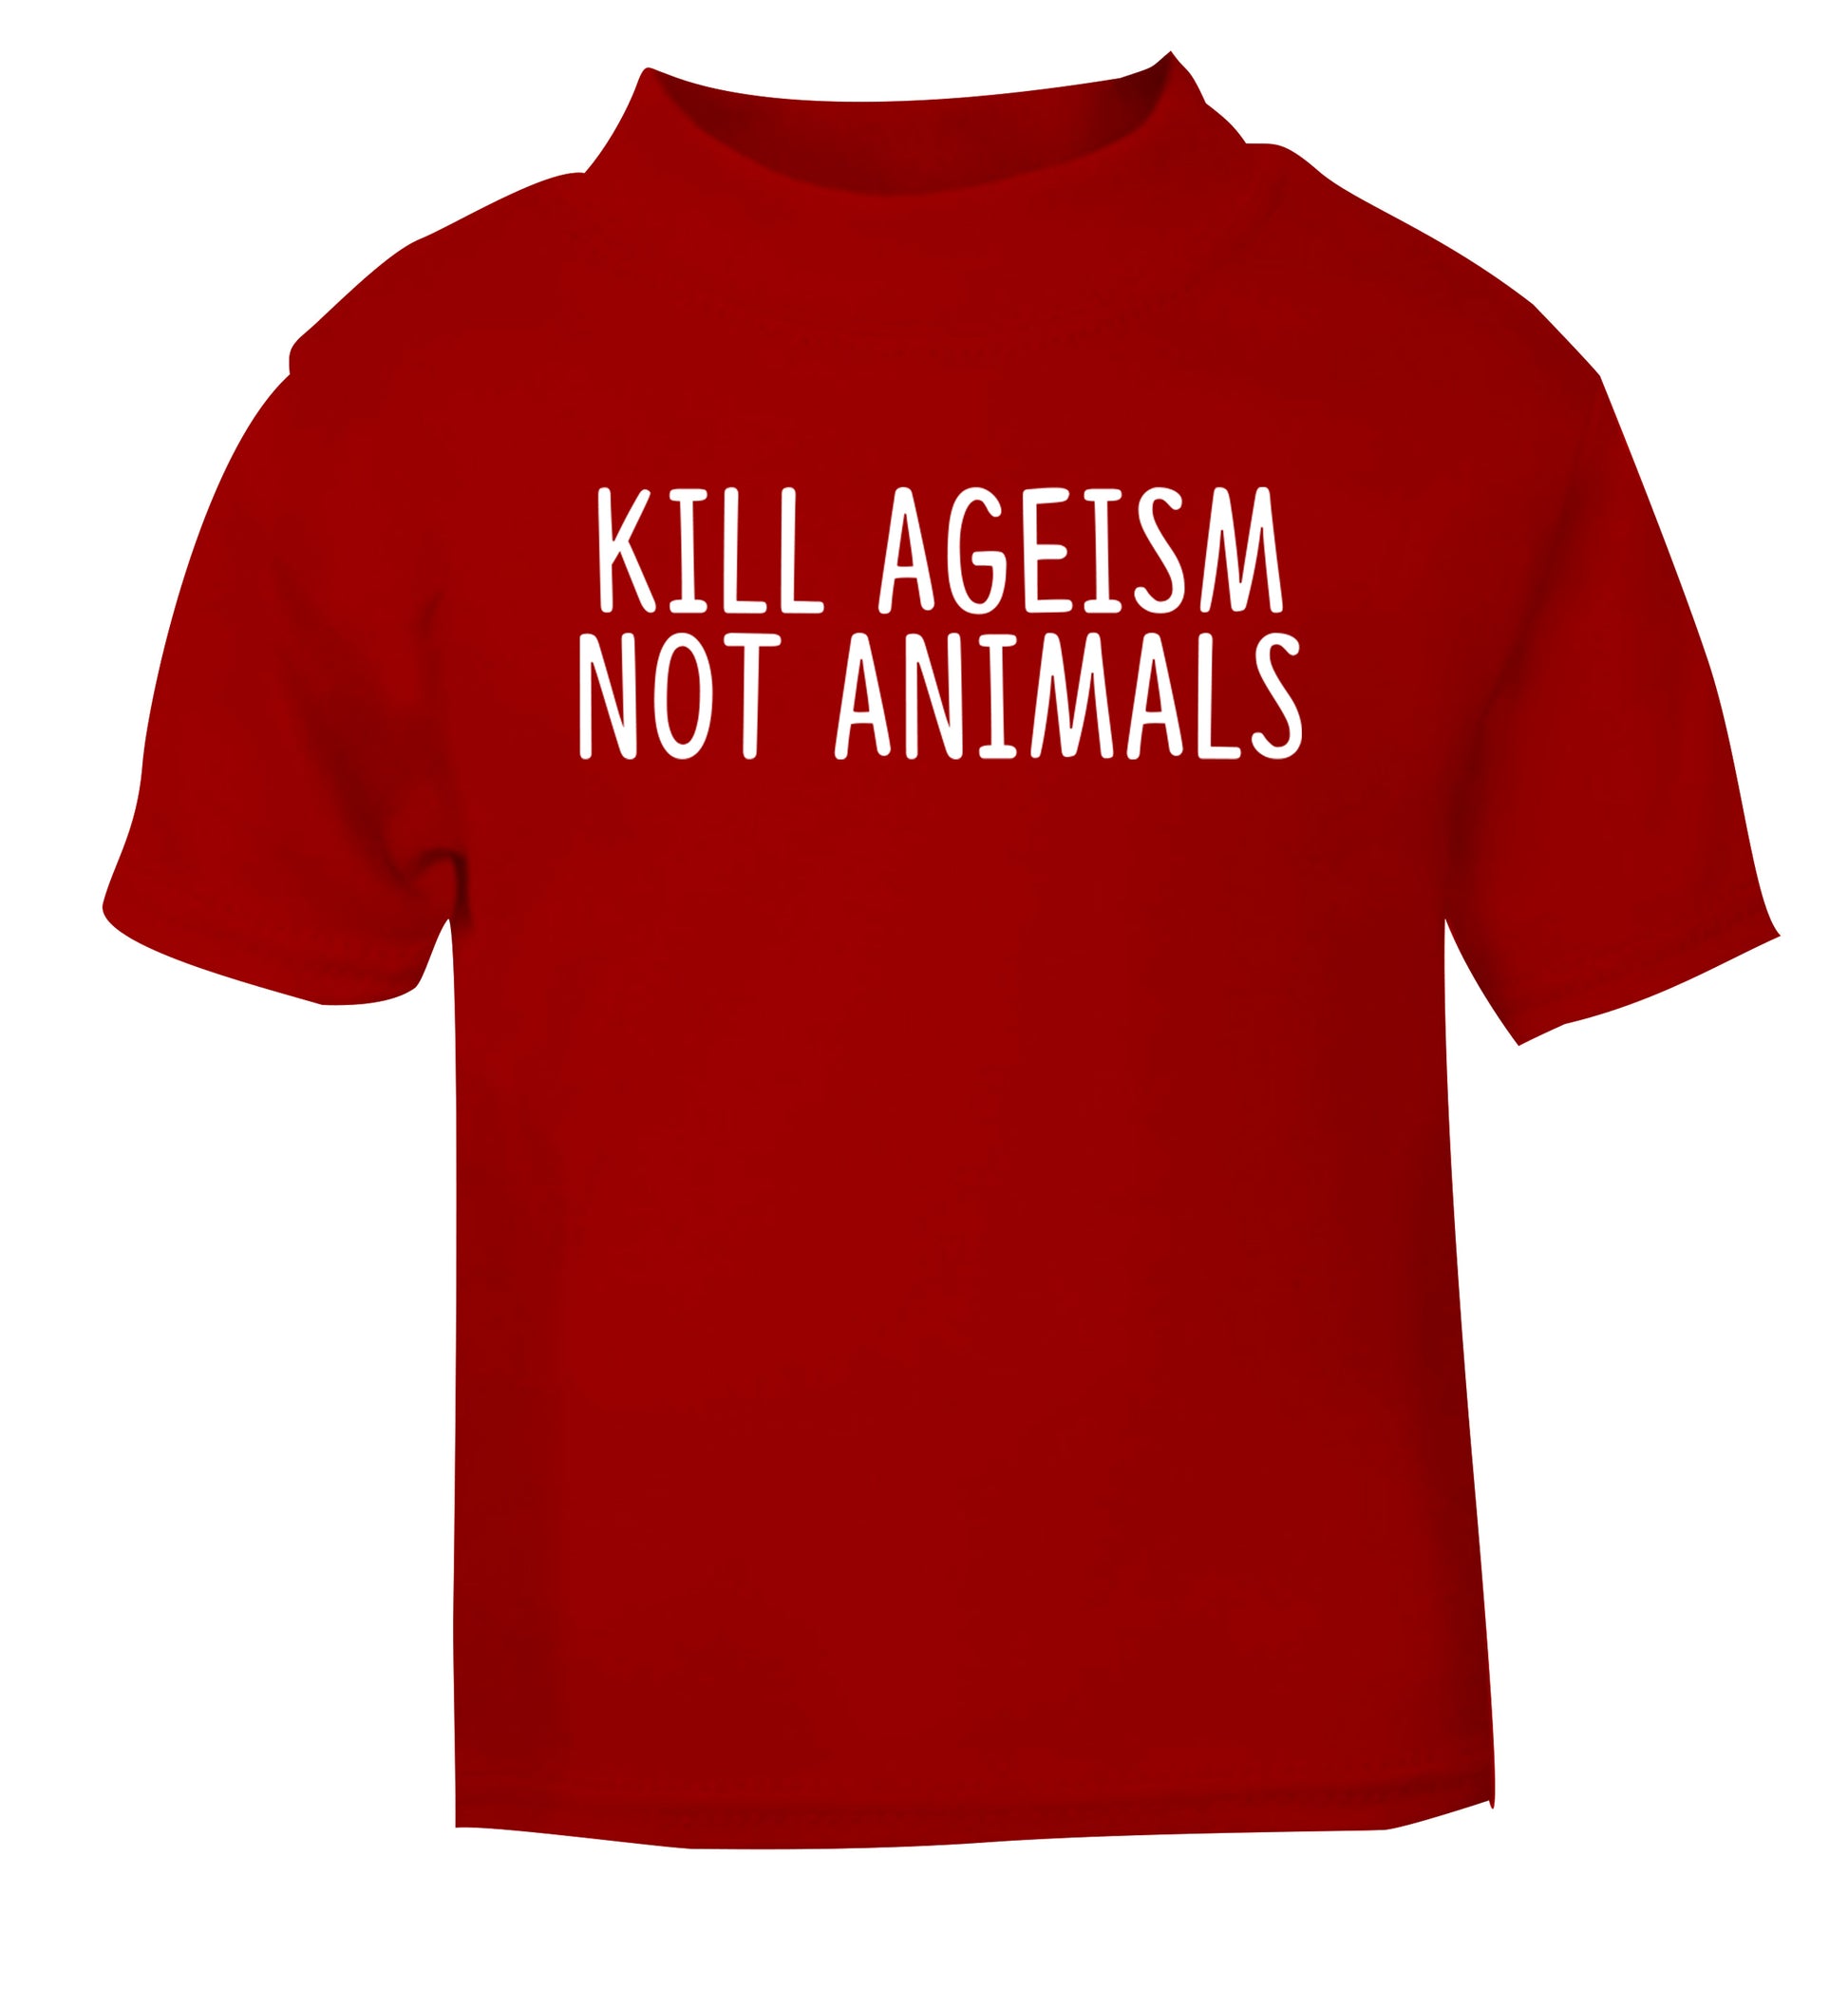 Kill Ageism Not Animals red Baby Toddler Tshirt 2 Years